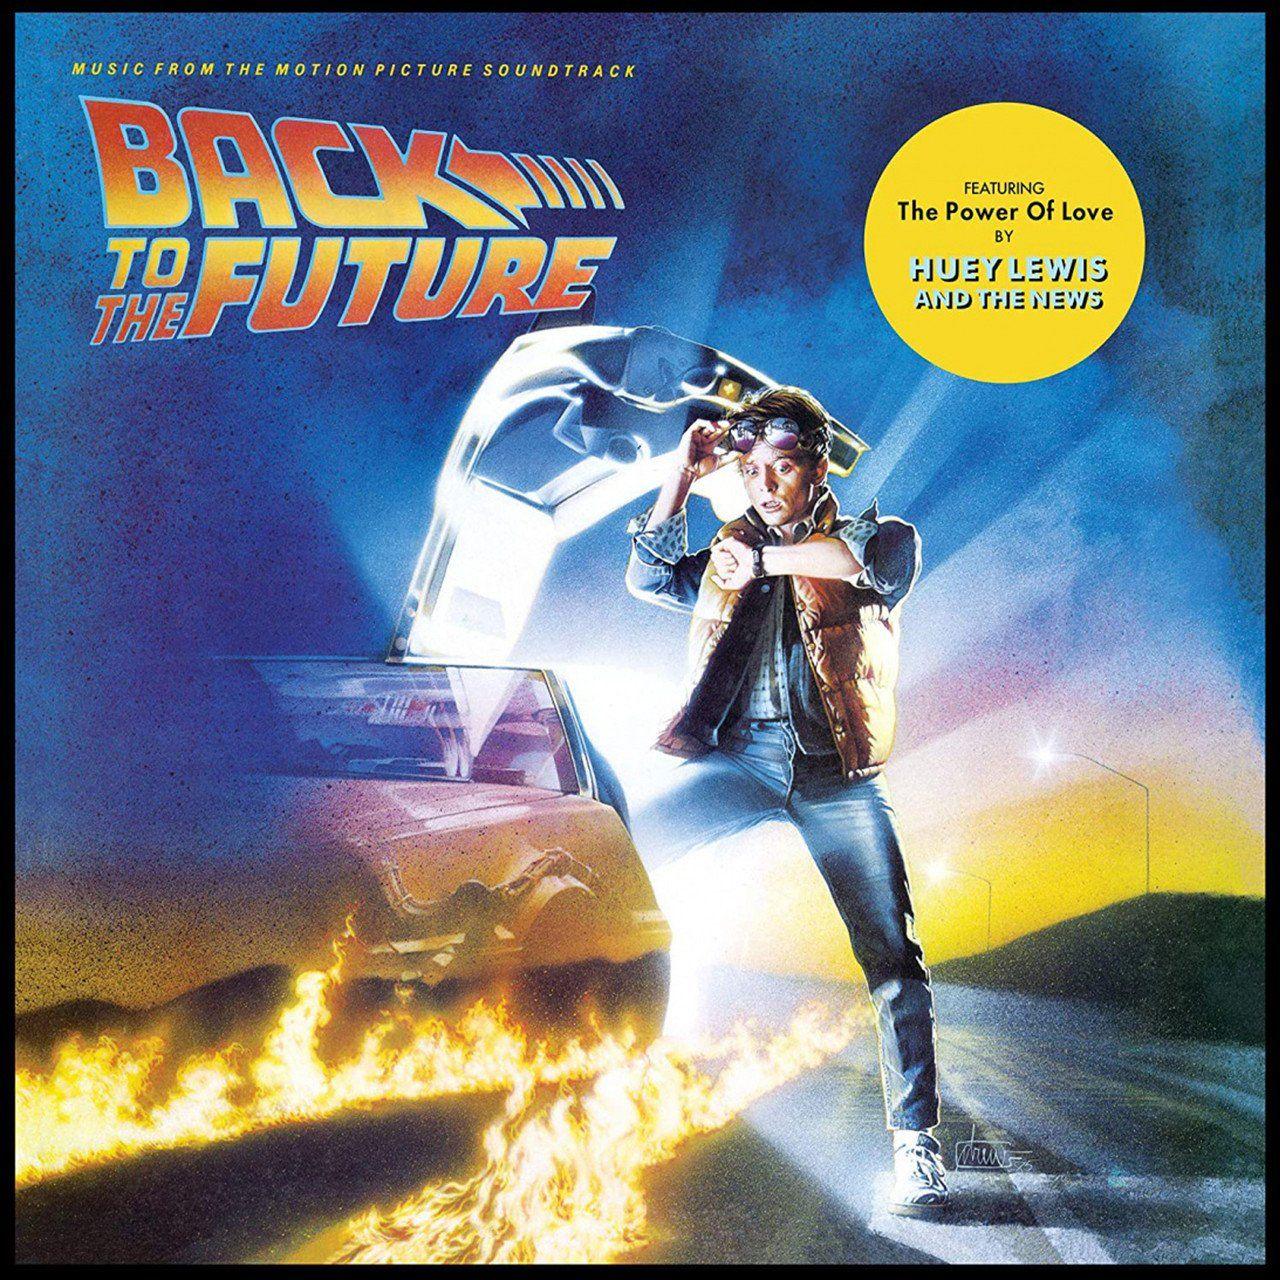 Back To The Future (Music From The Motion Picture Soundtrack) (Vinyl LP)